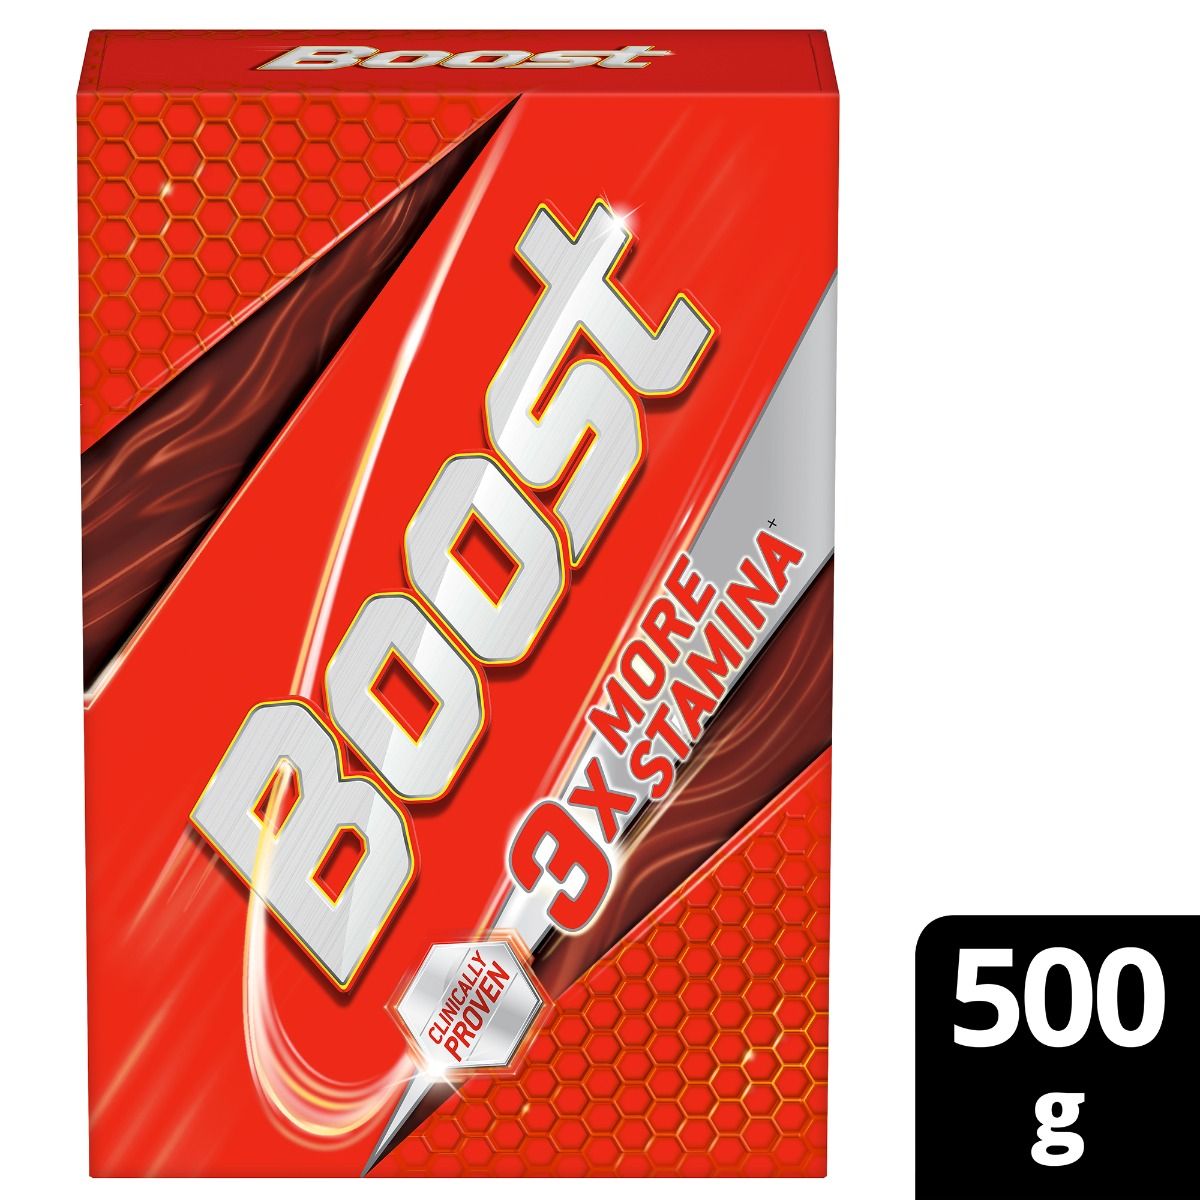 Boost Health & Nutrition Drink, 500 gm Refill Pack, Pack of 1 